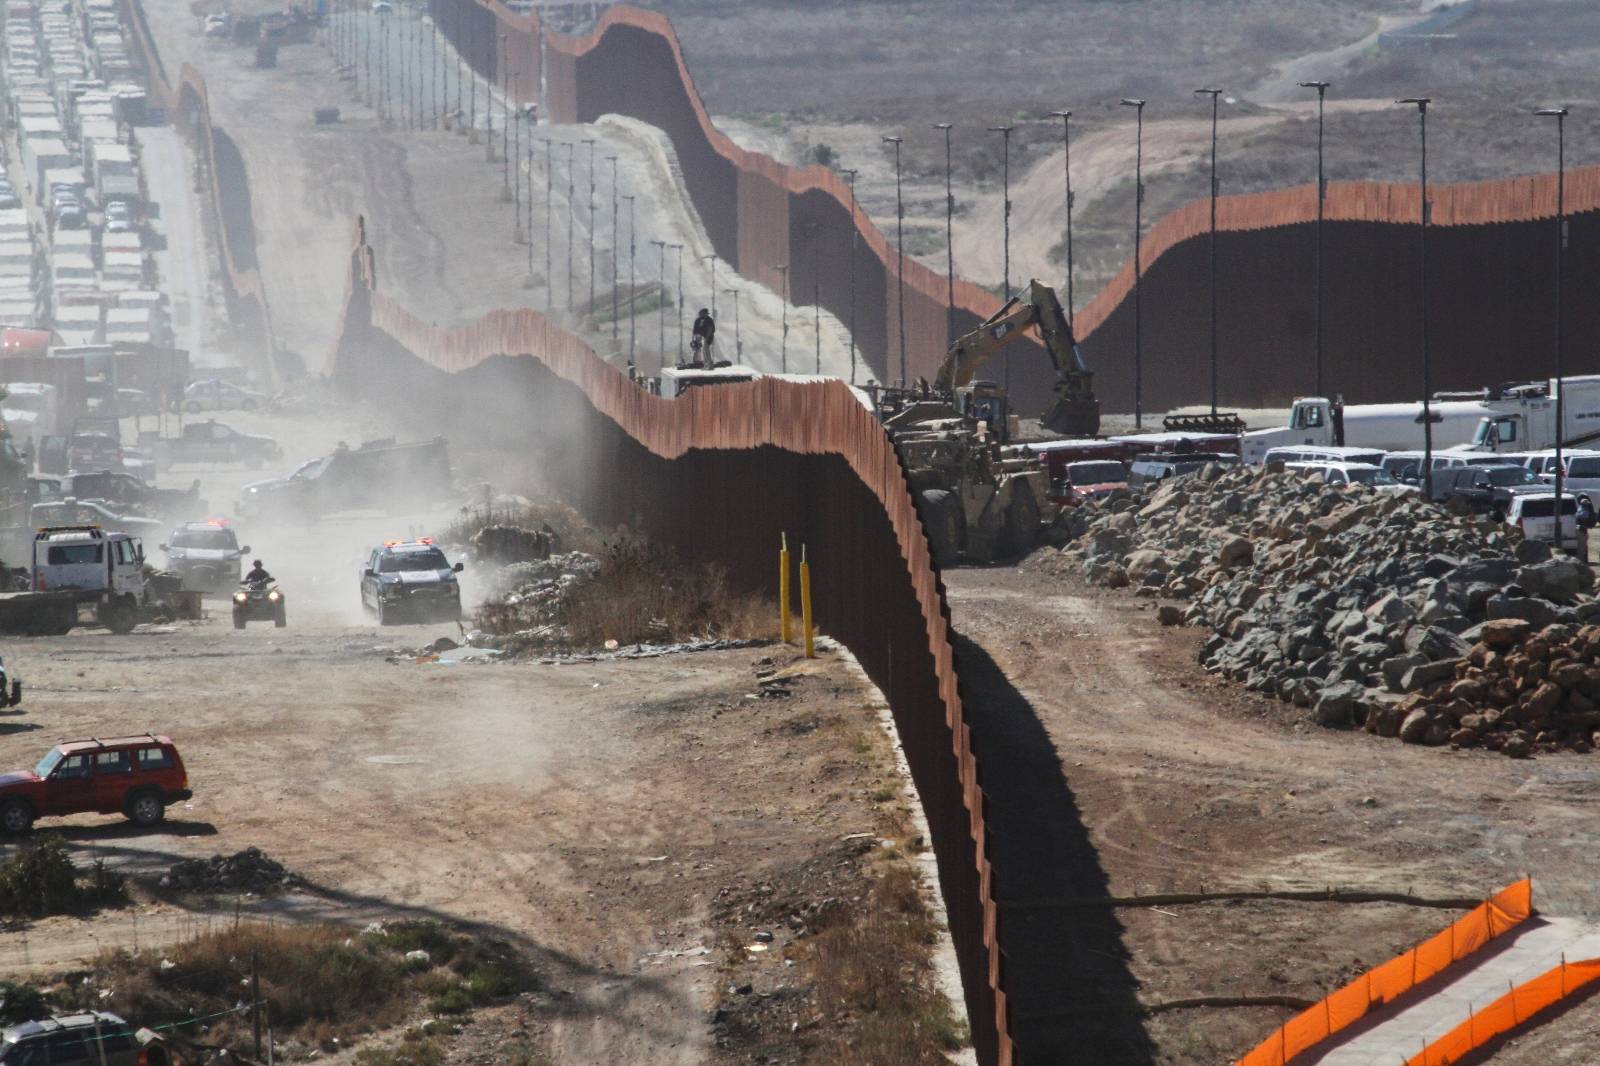 A general view shows Mexican security forces keeping watch at the border fence between Mexico and the United States, ahead of the visit of U.S. President Donald Trump to a section of the border wall in Otay Mesa, California, as pictured from Tijuana